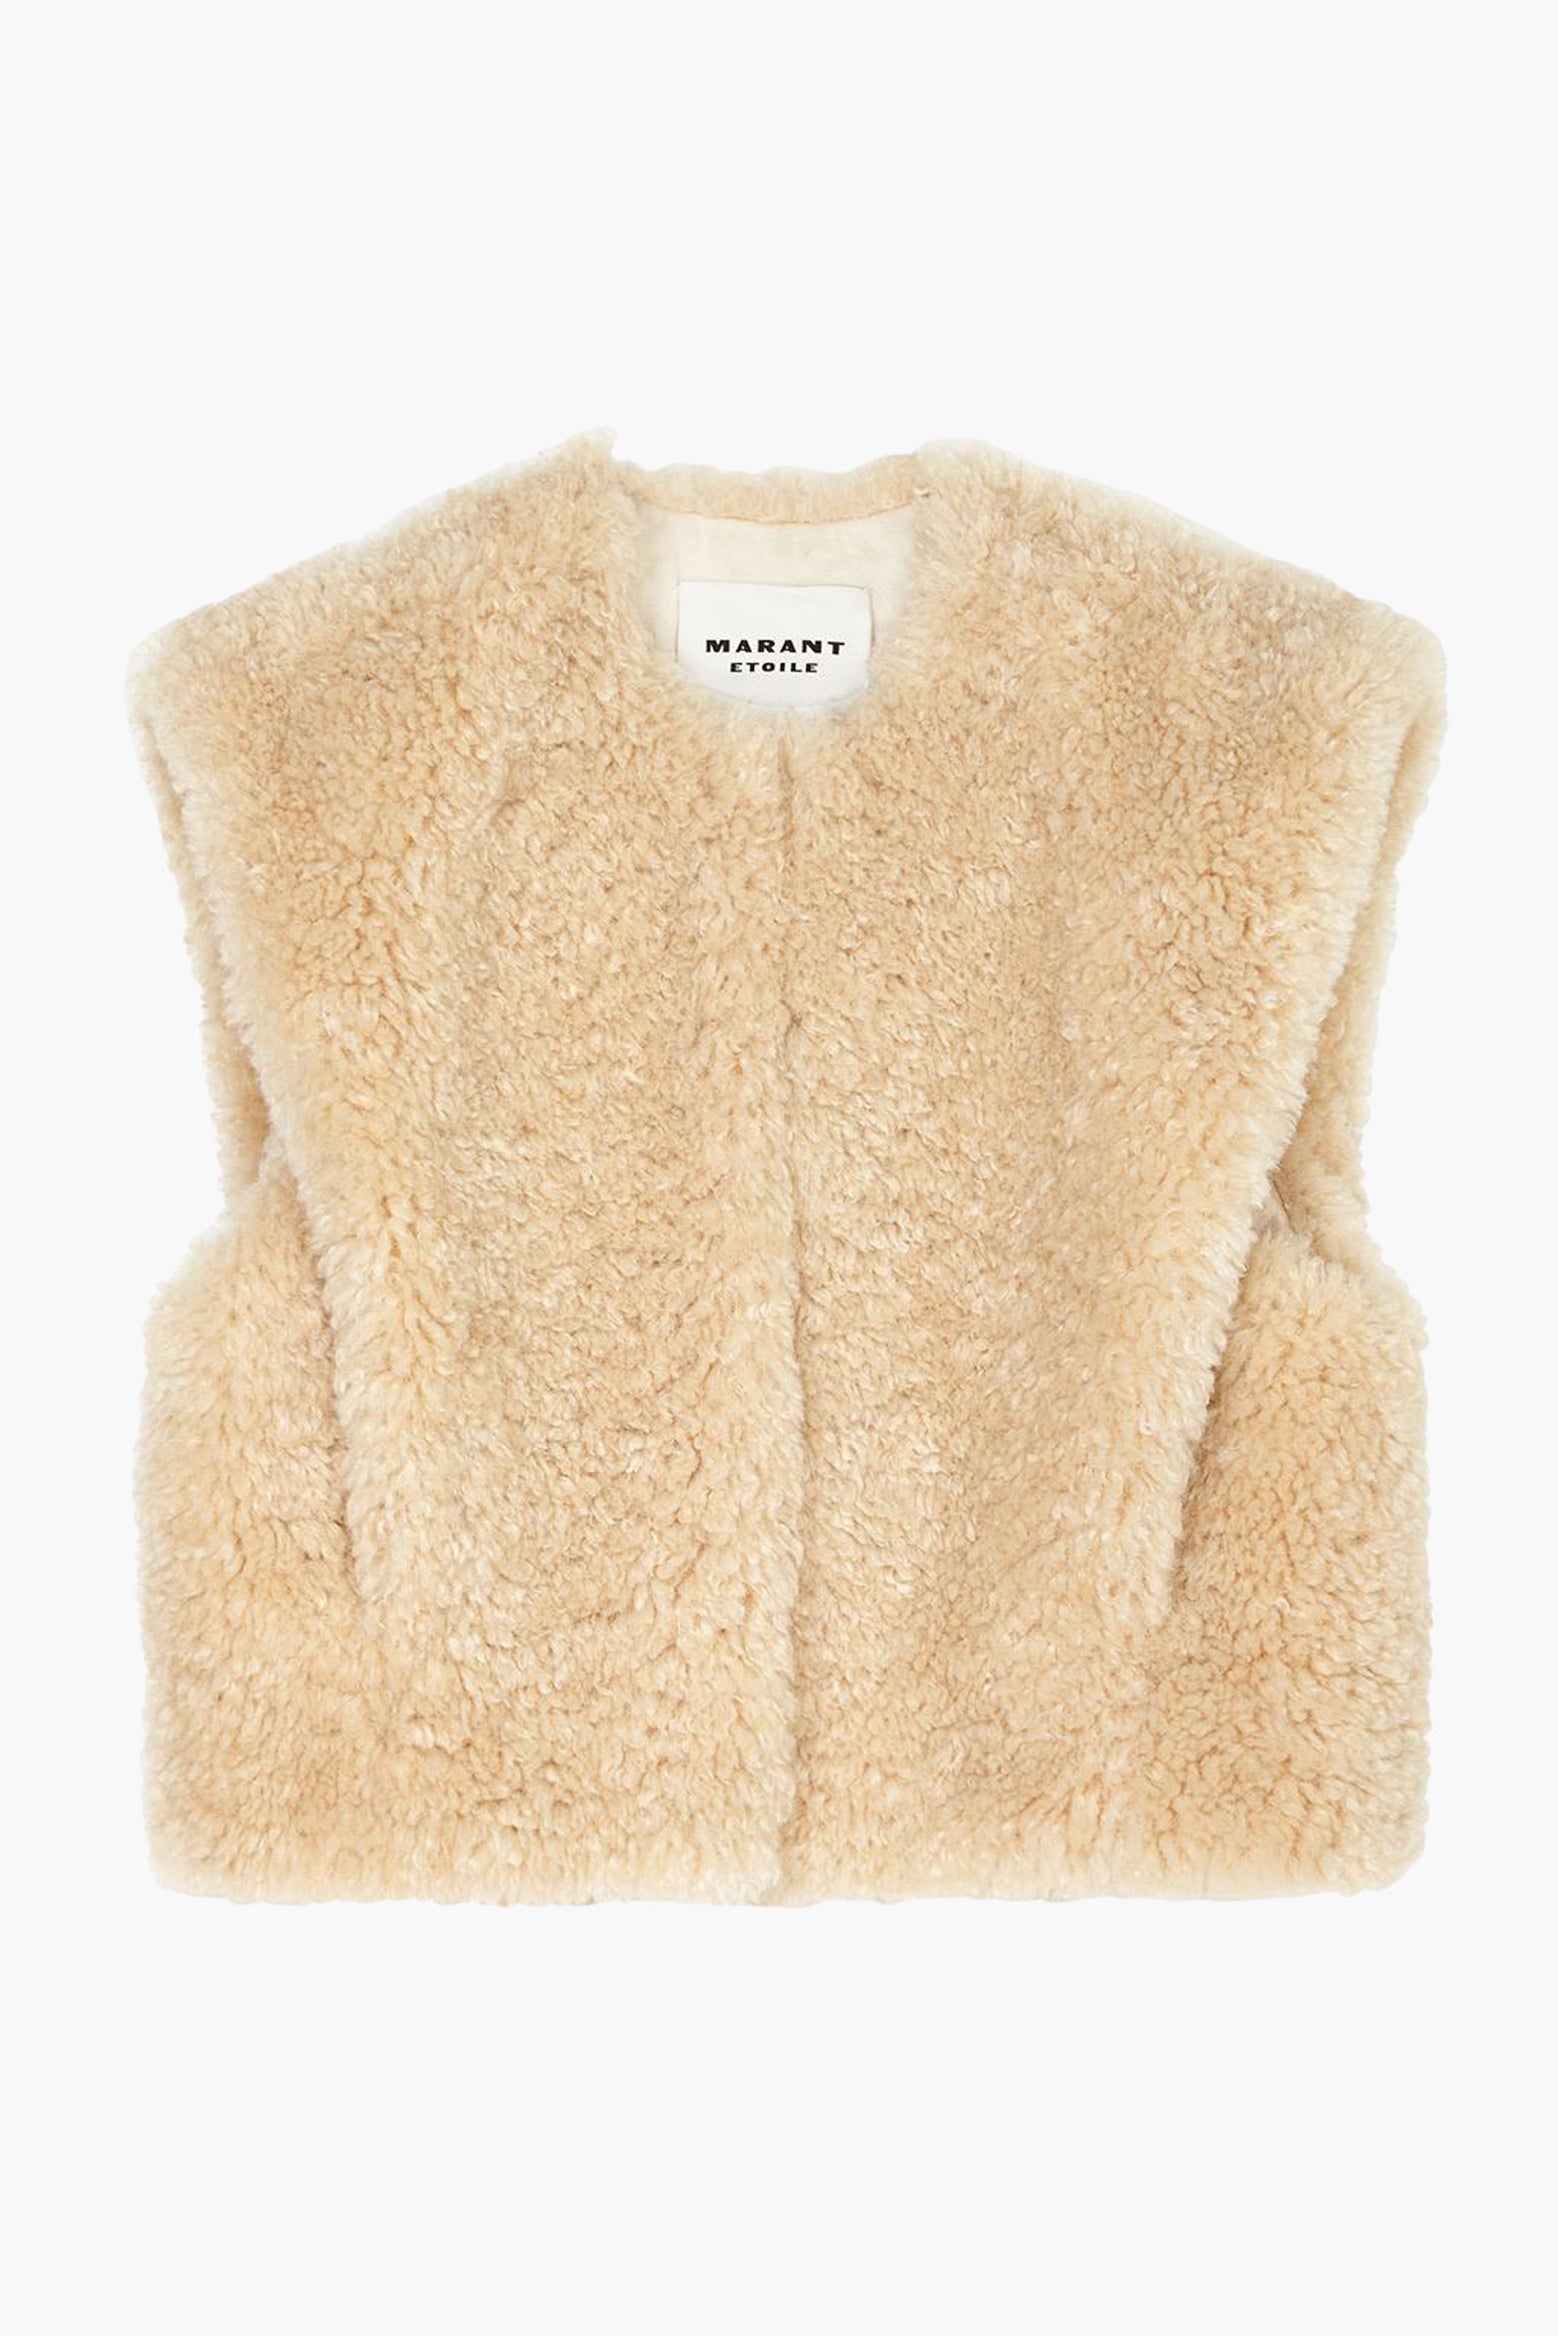 The Isabel Marant Feliz Cardigan in Ecru available at The New Trend Australia